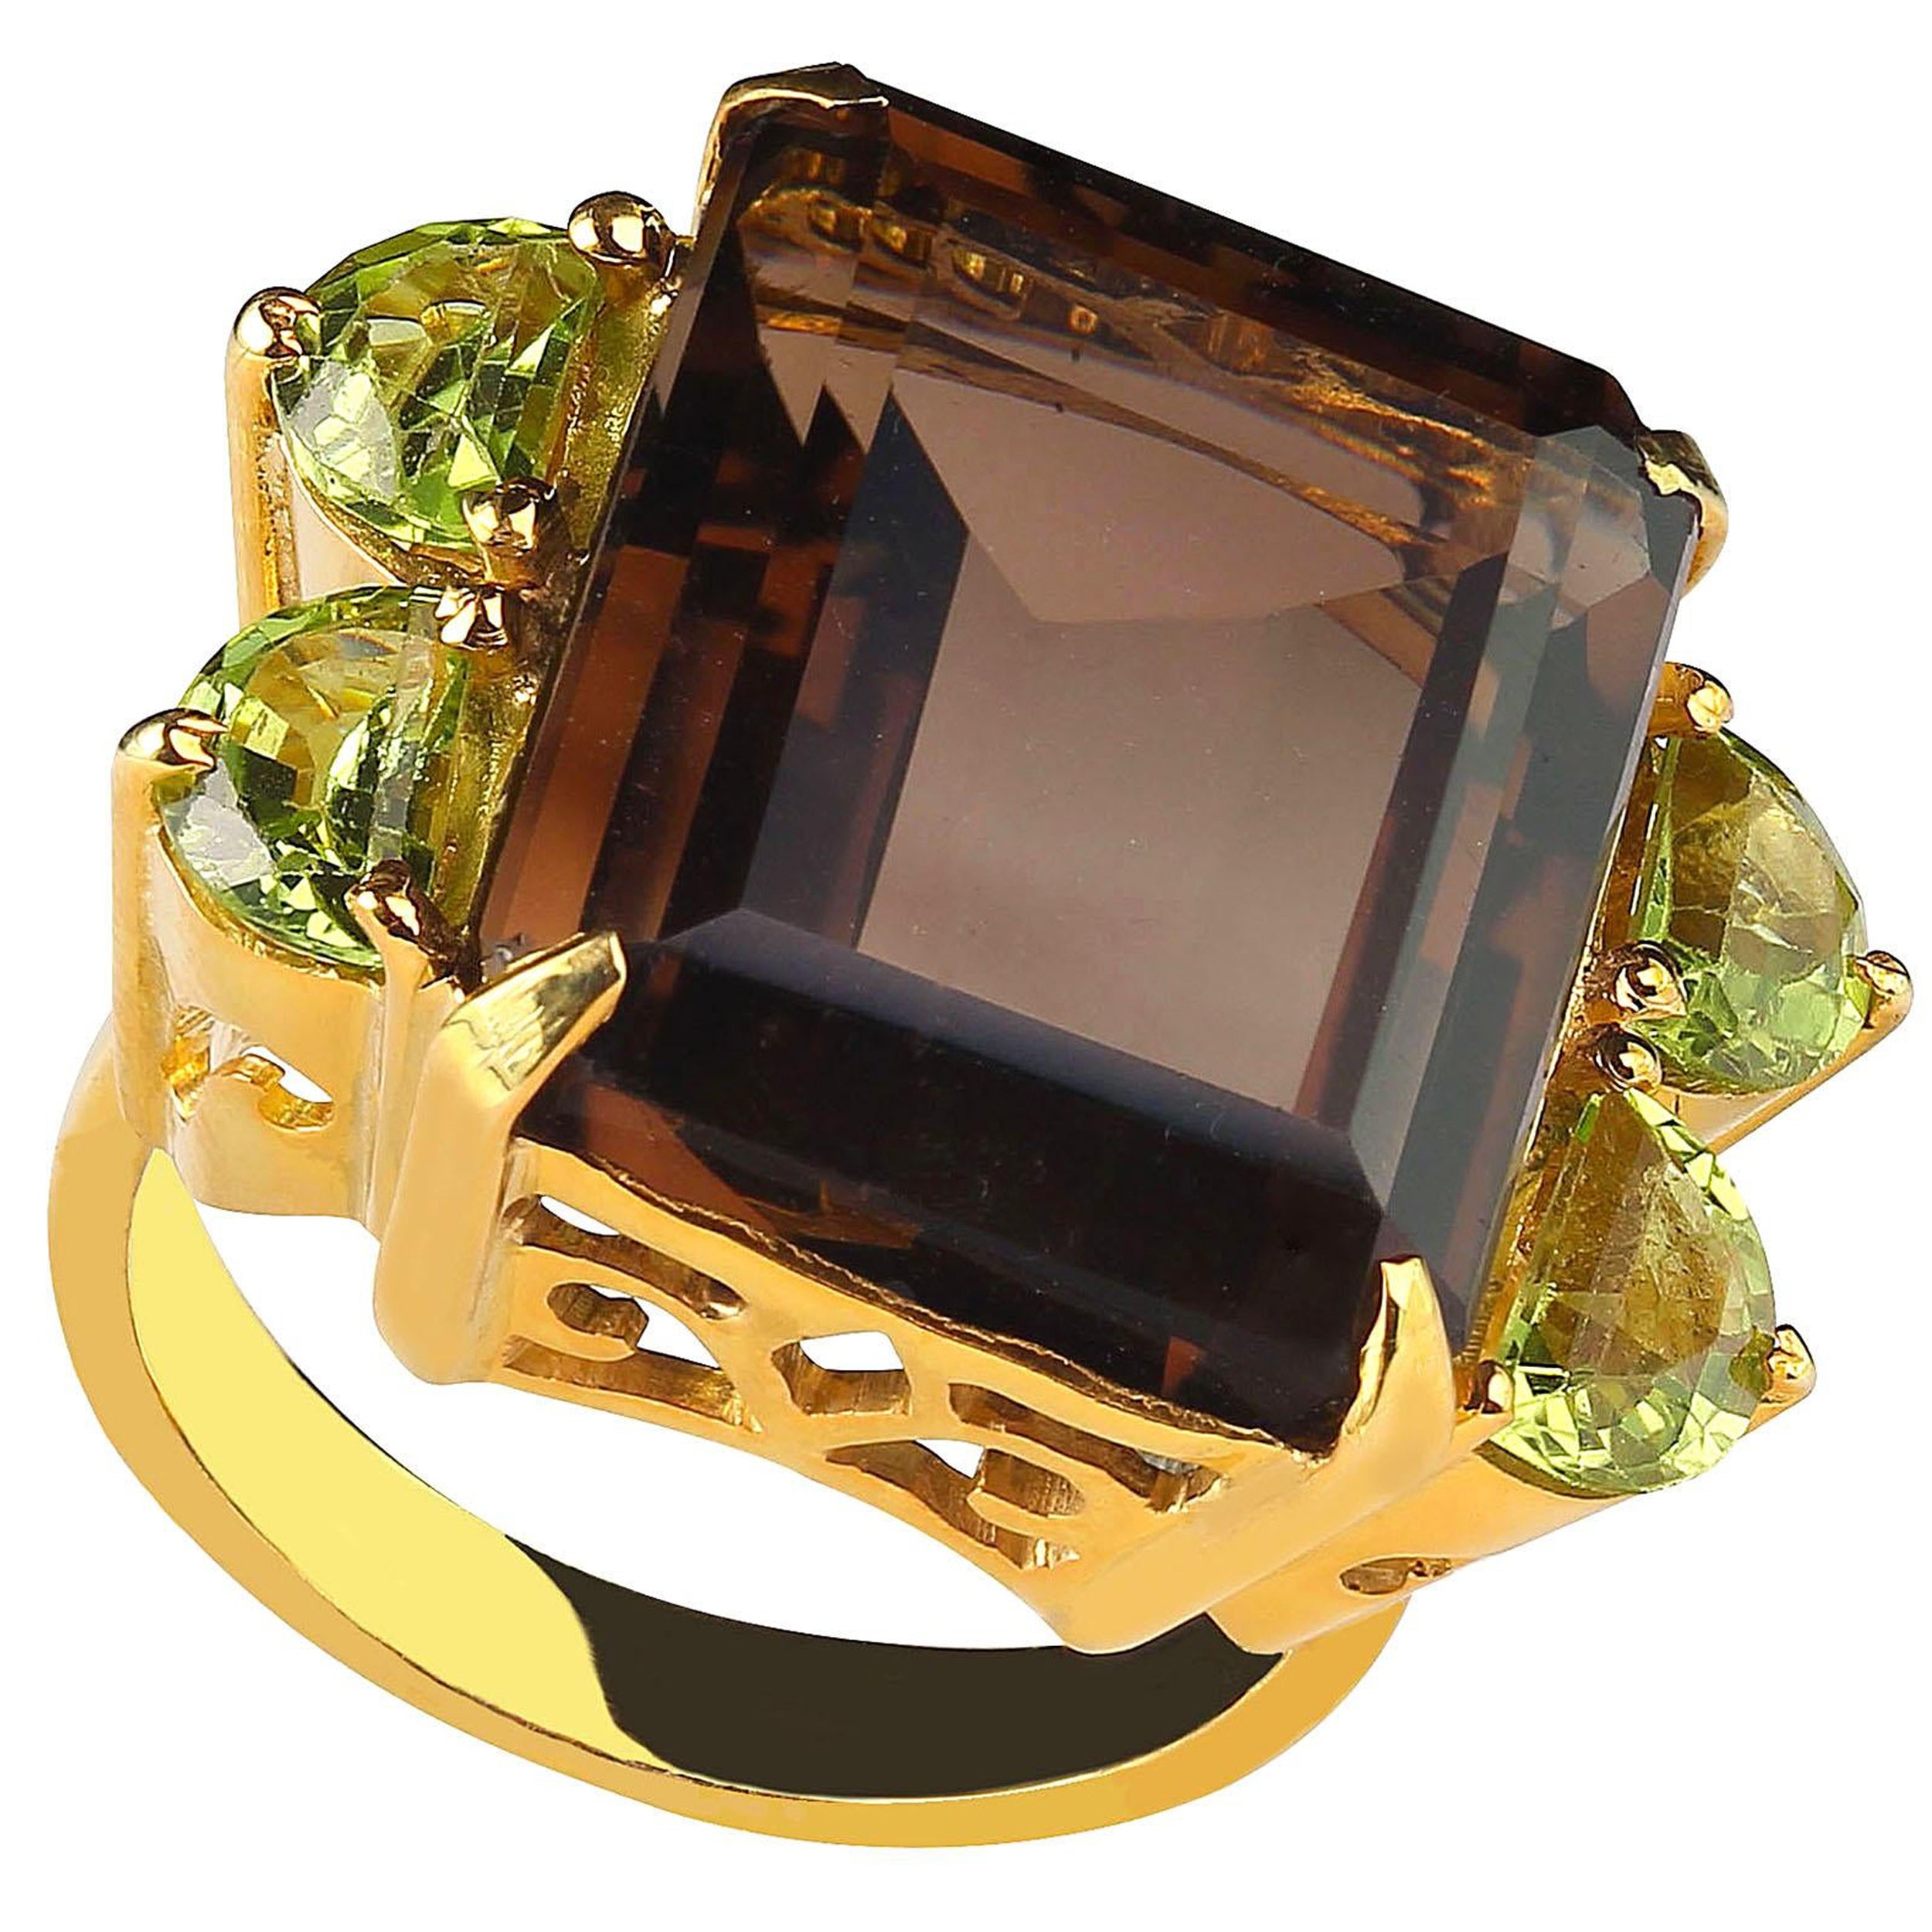 Bold dinner ring of Smoky Quartz and sparkling Peridot.  This sizable 7 ring loves to go out for cocktails and sparkles at dinner.  The emerald cut Smoky Quartz is 18.86 carats and the adorable side Peridot have a total weight of 2.03 carats.  They